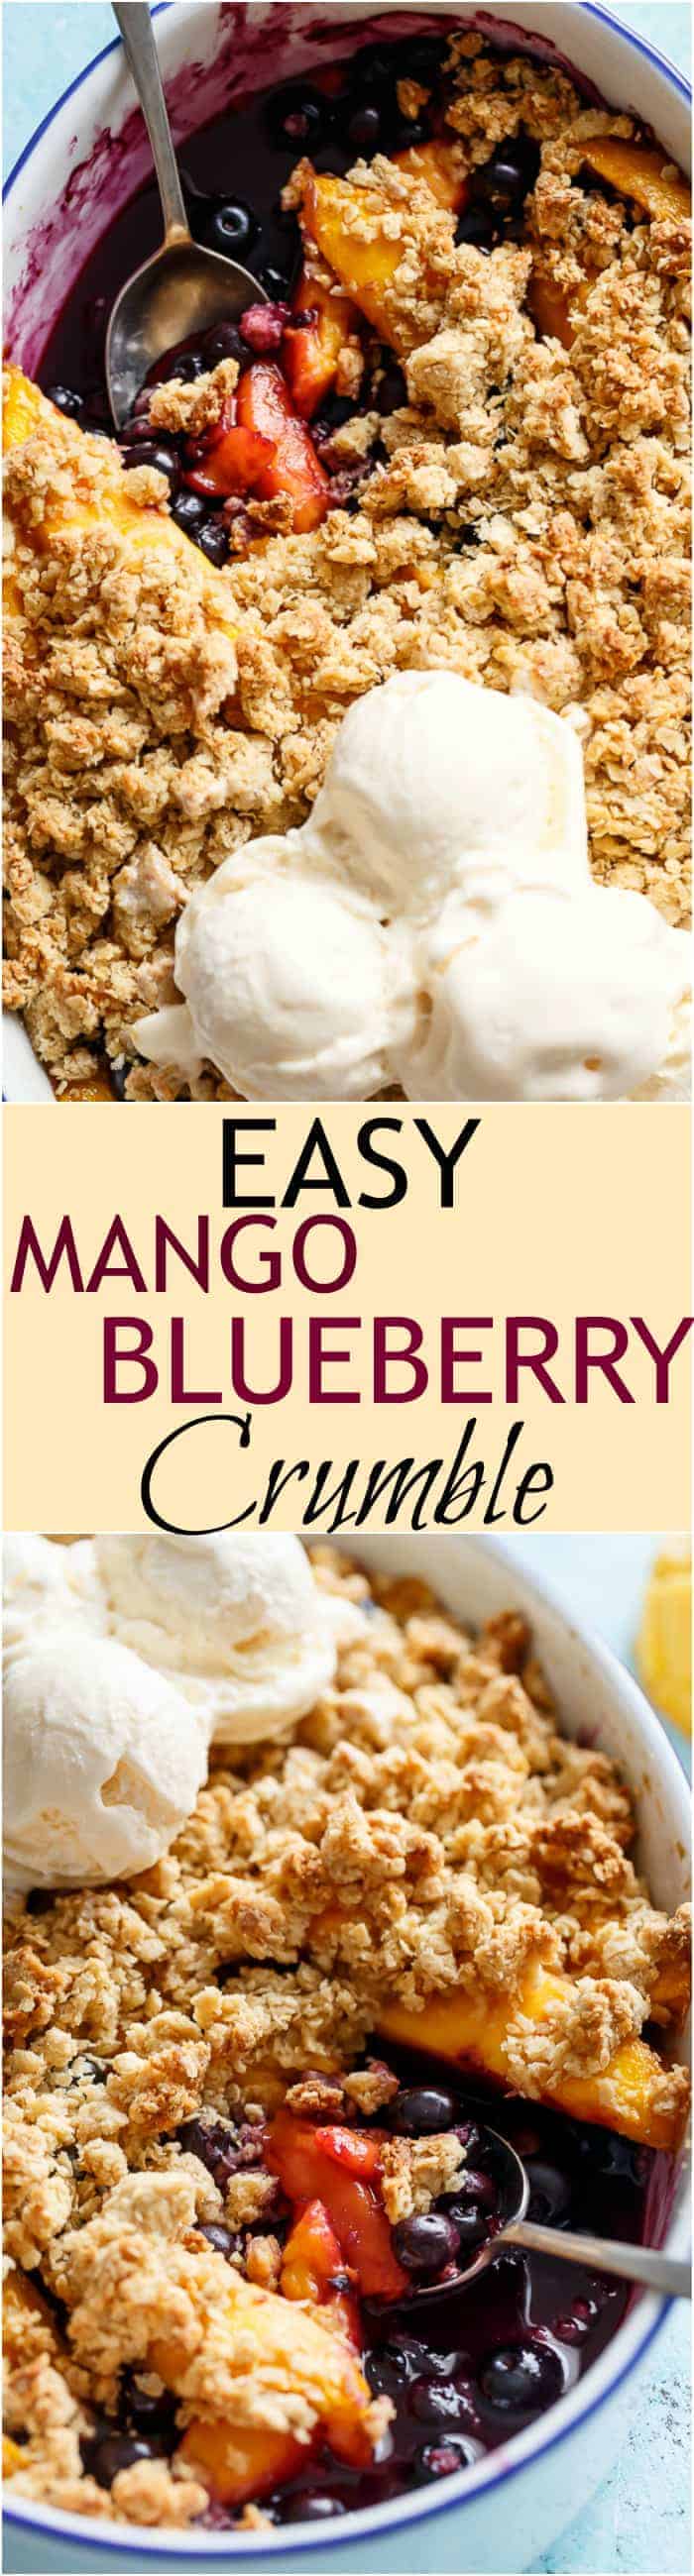 A classic and Easy Mango Blueberry Crumble with the crispy, buttery topping that's lighter in calories and BIG on flavour! | https://cafedelites.com